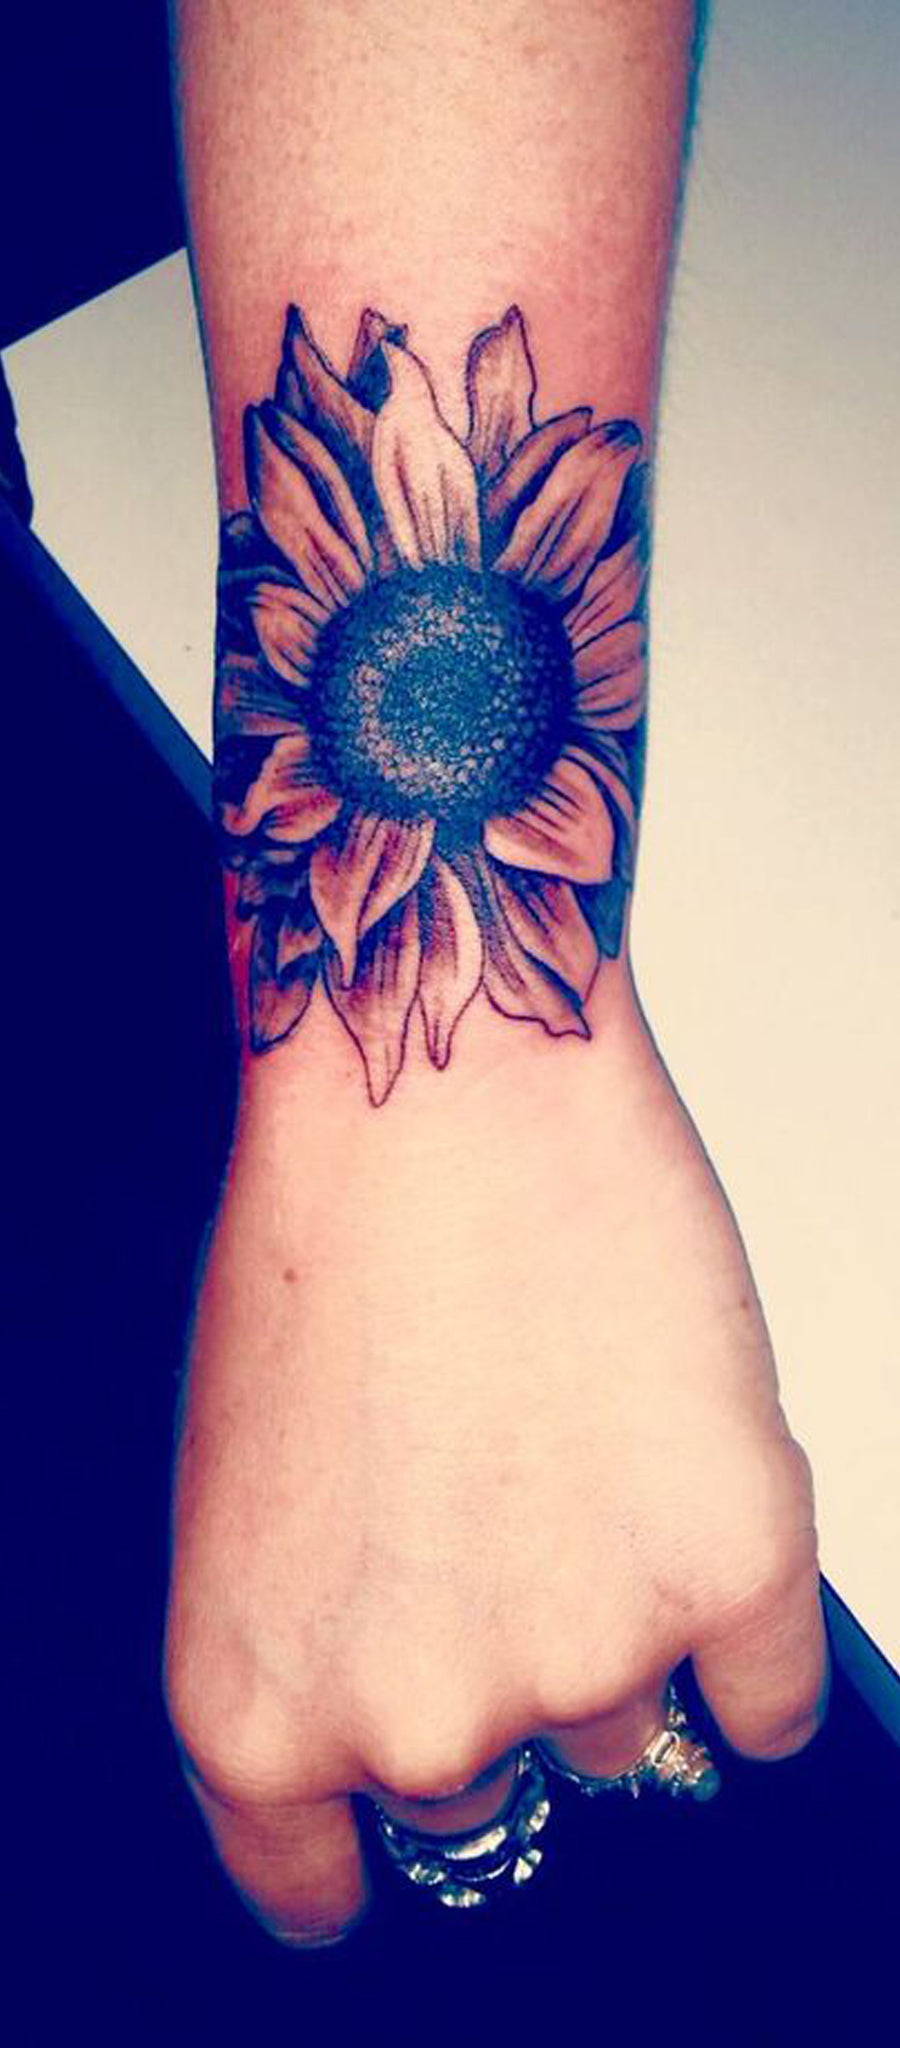 Daisy bouquet with stems and with a sunflower tattoo idea | TattoosAI